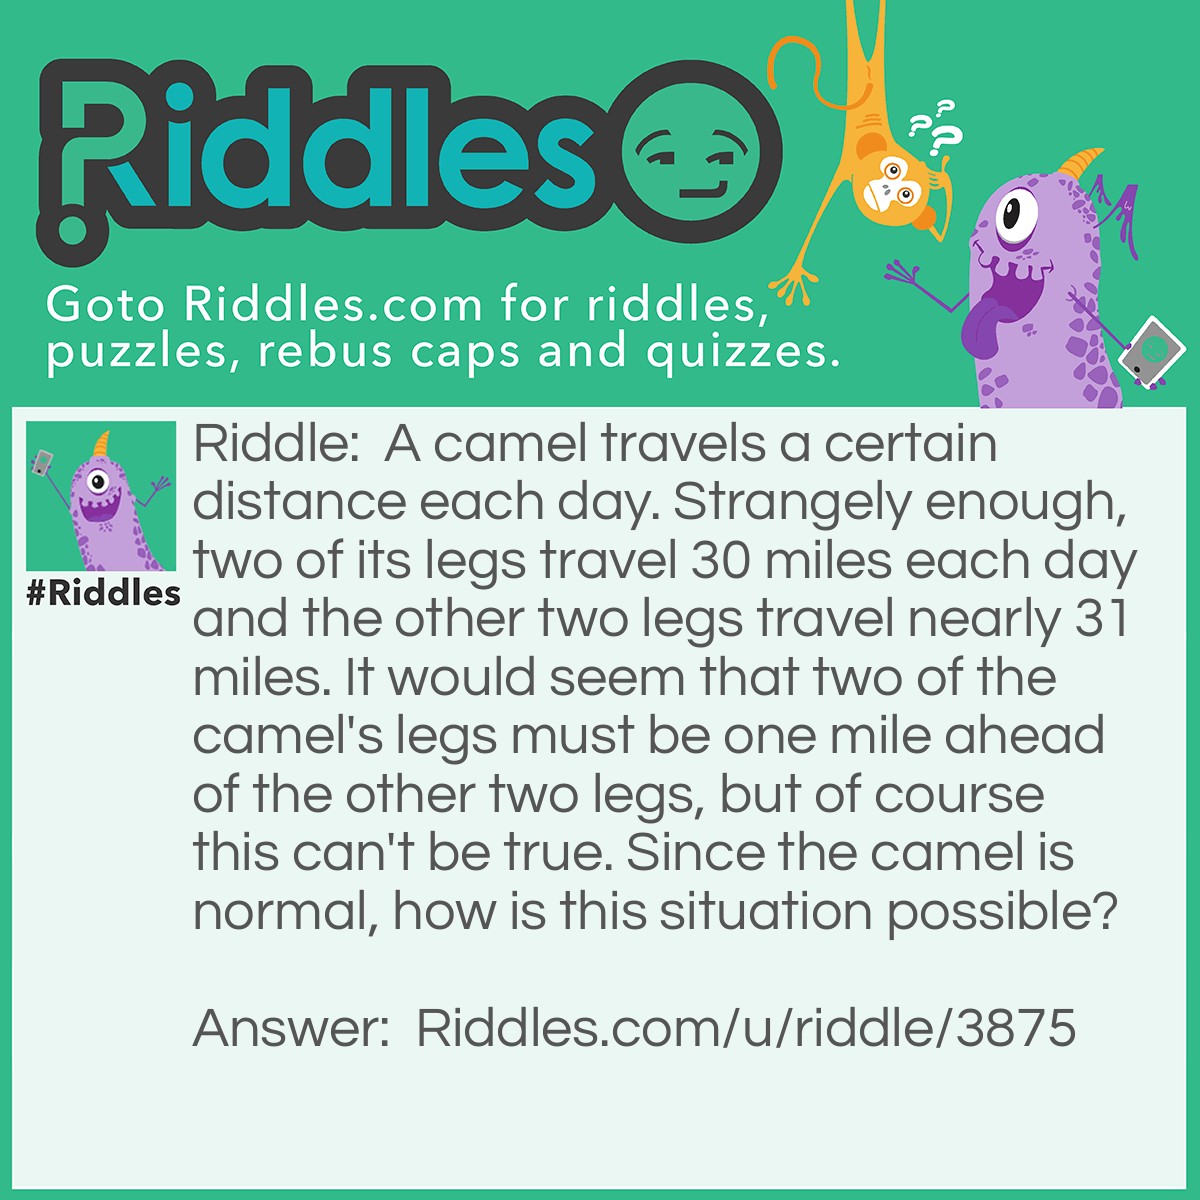 Riddle: A camel travels a certain distance each day. Strangely enough, two of its legs travel 30 miles each day and the other two legs travel nearly 31 miles. It would seem that two of the camel's legs must be one mile ahead of the other two legs, but of course this can't be true. Since the camel is normal, how is this situation possible? Answer: The camel operates a mill and travels in a circular clockwise direction. The two outside legs will travel a greater distance than the two inside legs.